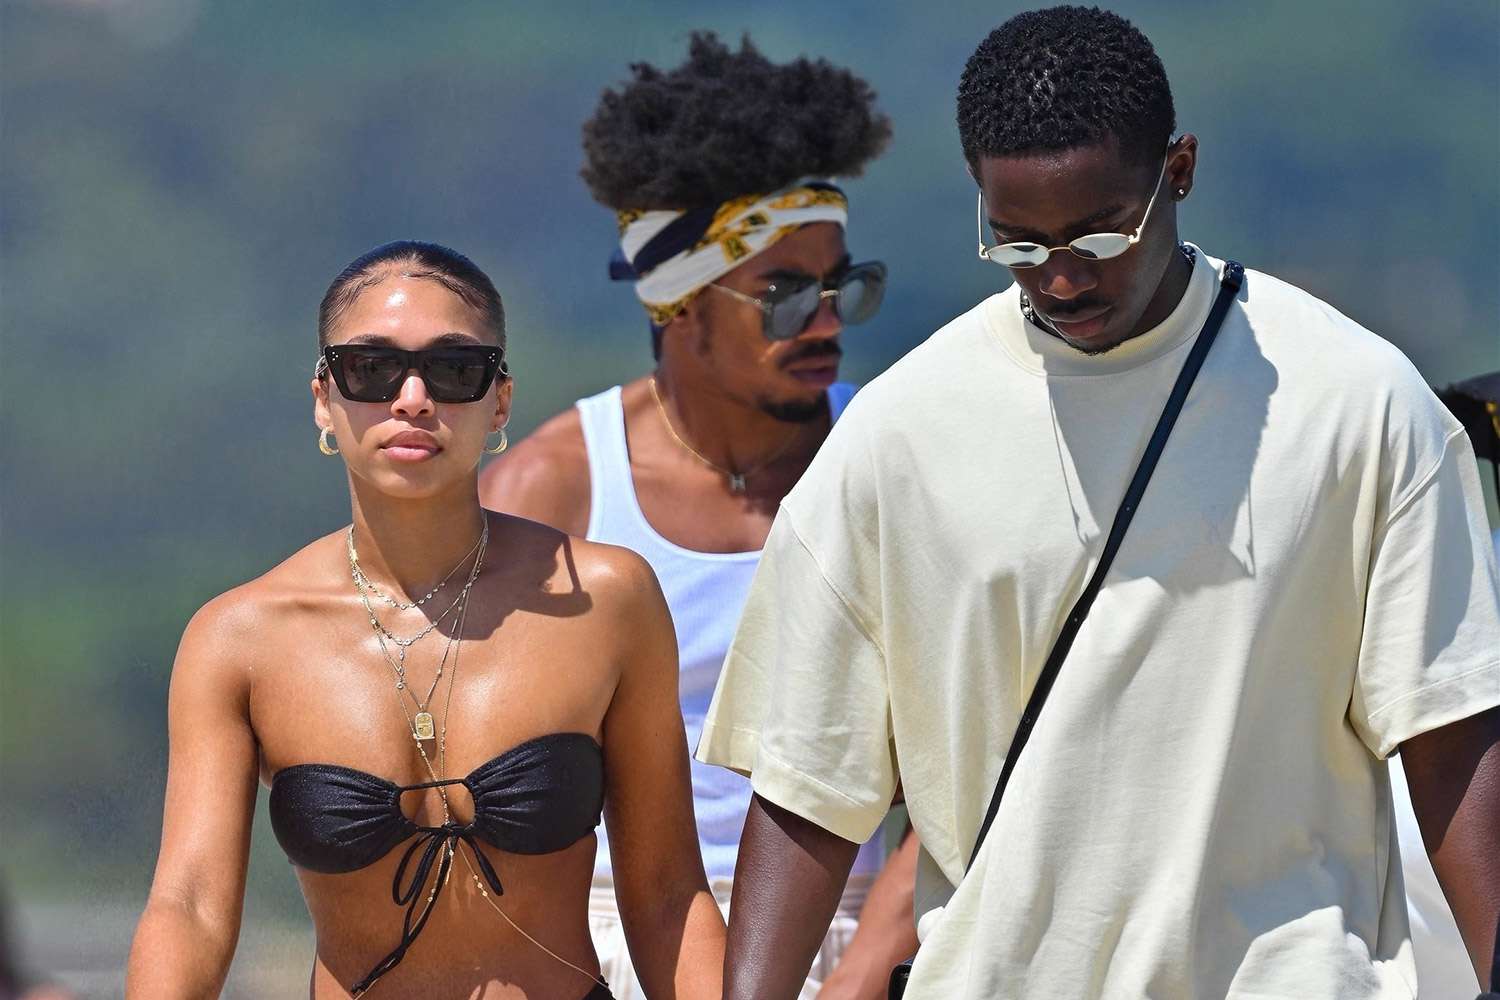 Damson Idris and his partner Lori Harvey walk hand in hand while arriving in style at the Shellona restaurant in Saint-Tropez in the French Riviera